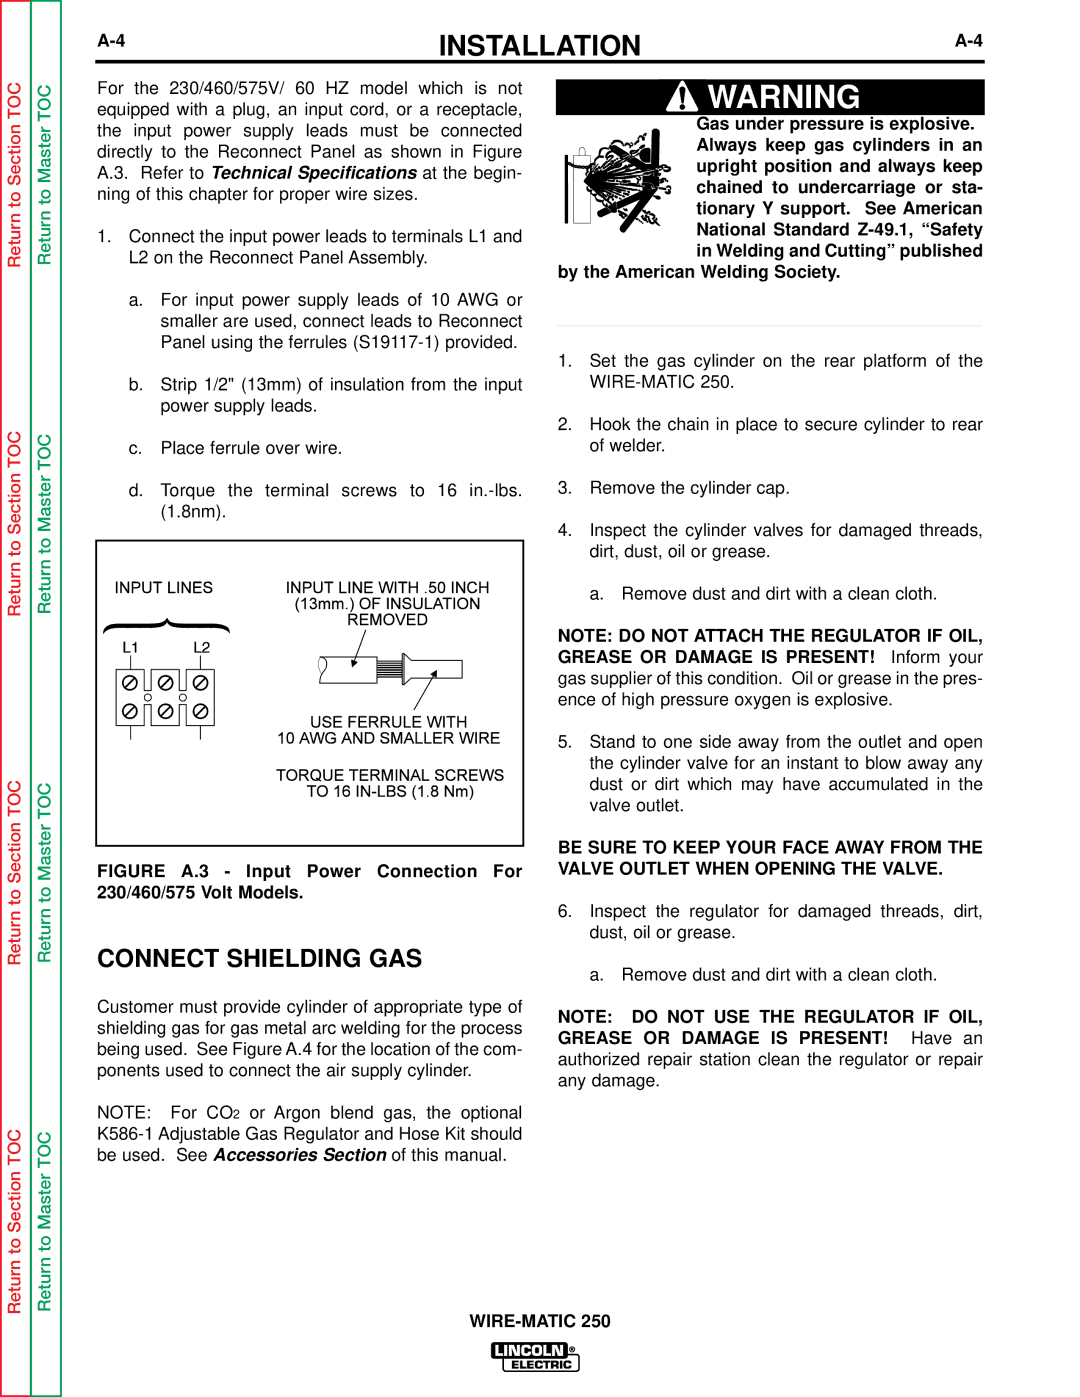 Lincoln Electric SVM 117-A service manual Connect Shielding GAS 